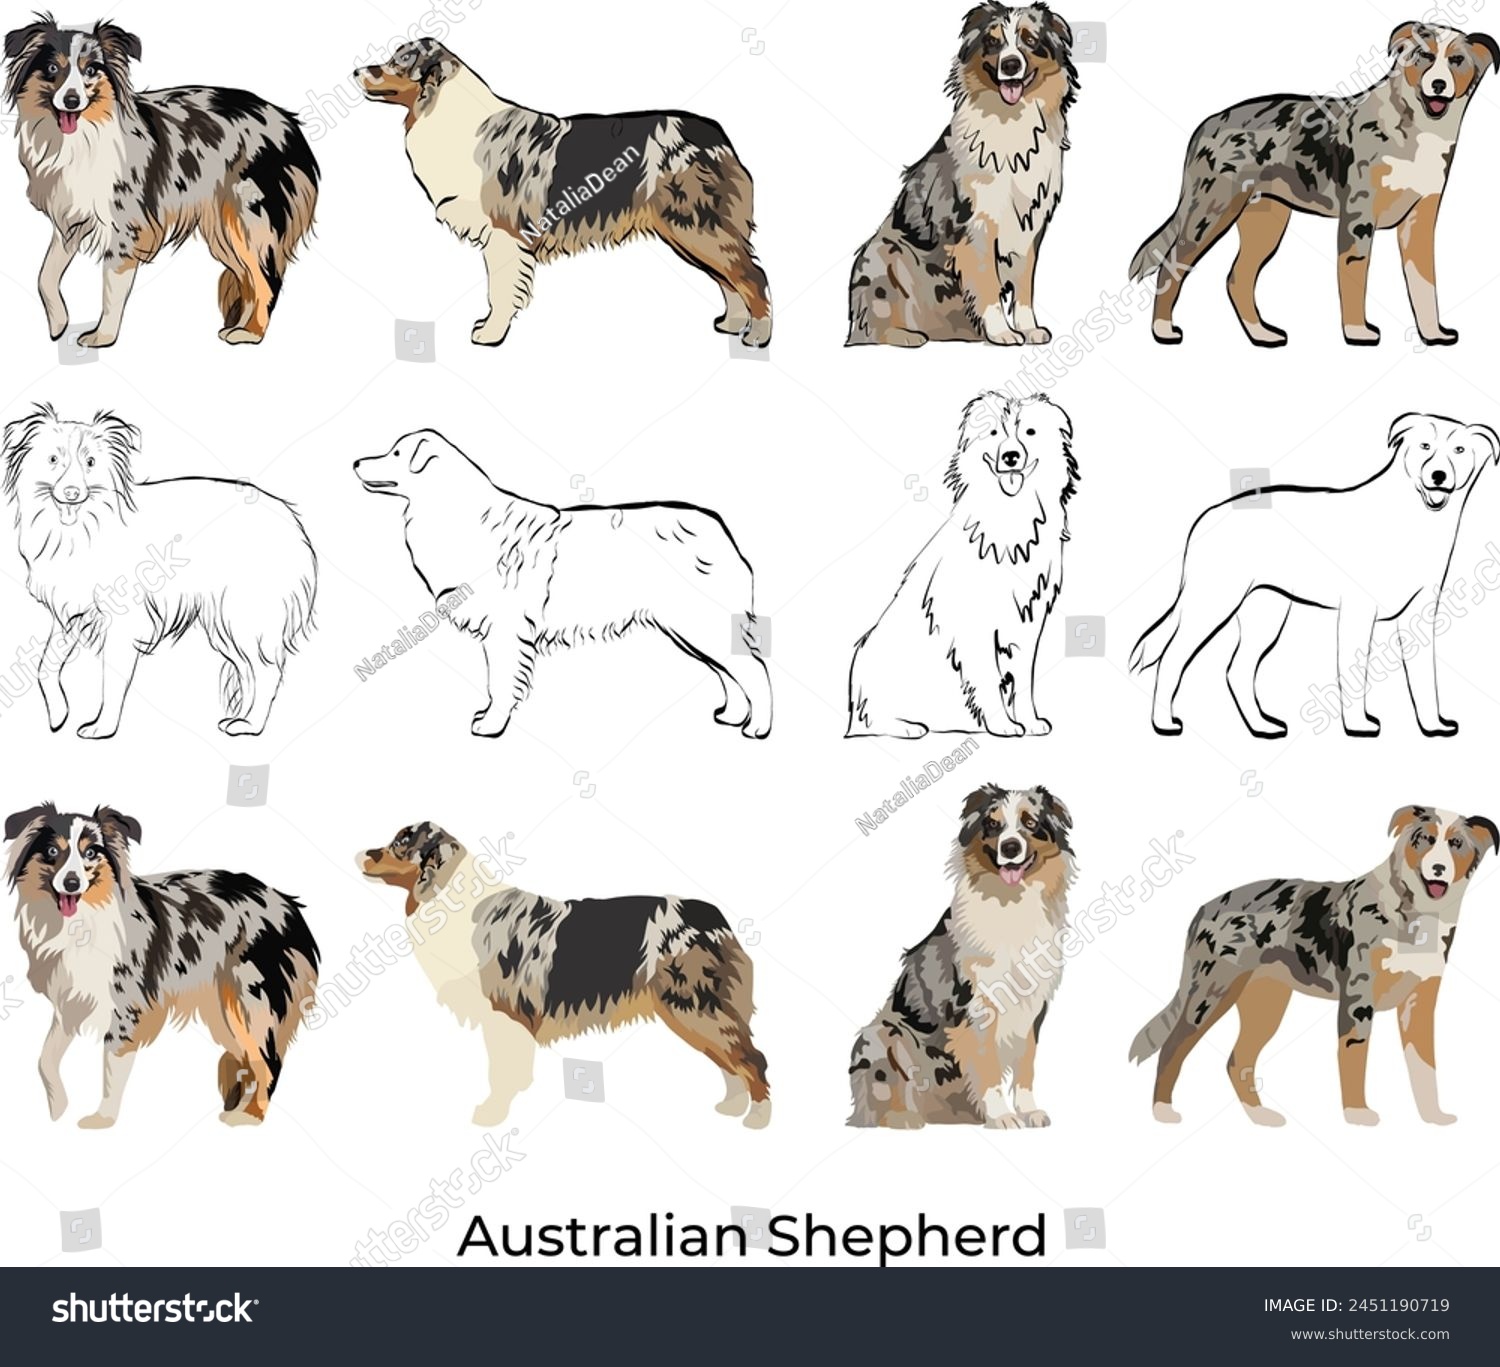 SVG of Australian Shepherd breed, Aussie Colors and Coat Patterns. Black stroke, drawing style, illustration with stroke. Black and tan, Tan point blue merle, Red merle, tri, bi, black, Blue merle. Contours. svg